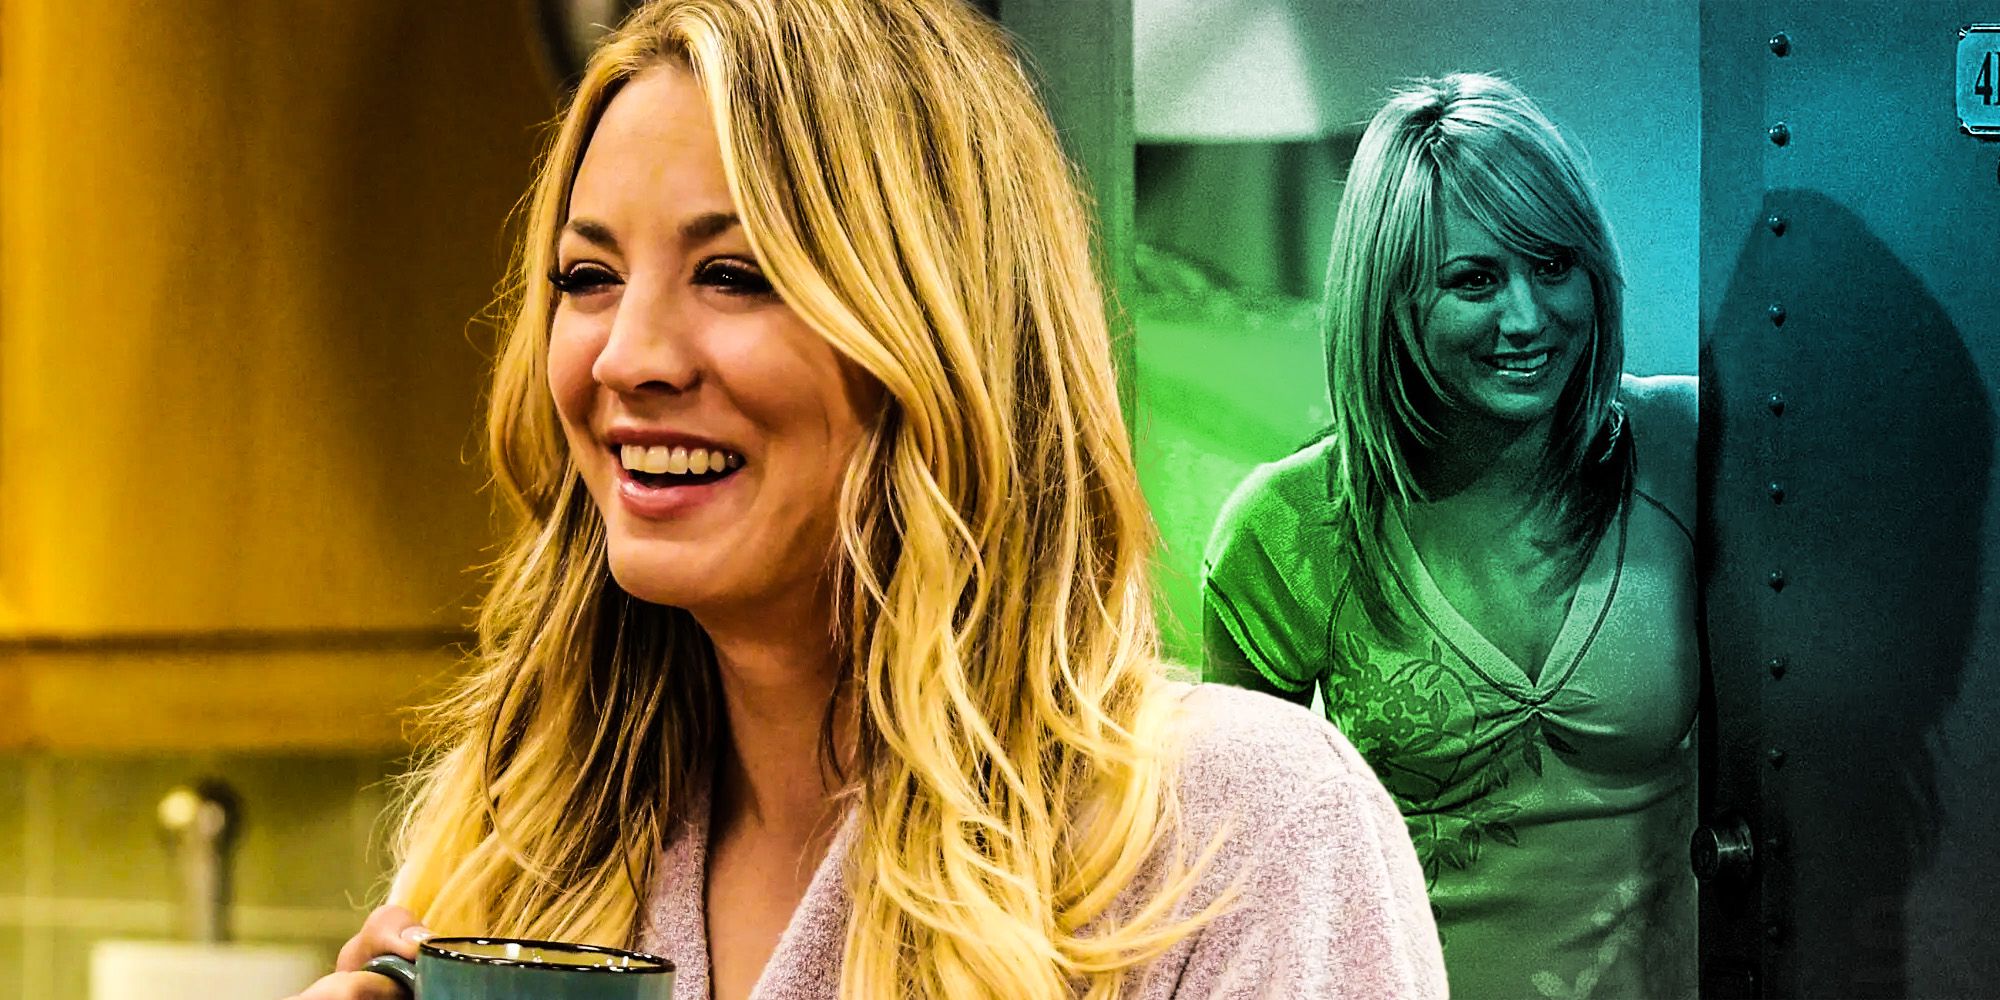 The Big Bang Theory Secretly Revealed Penny S Surname Kaley cuoco called to correct tanya's pronunciation of last name subscribe: the big bang theory secretly revealed